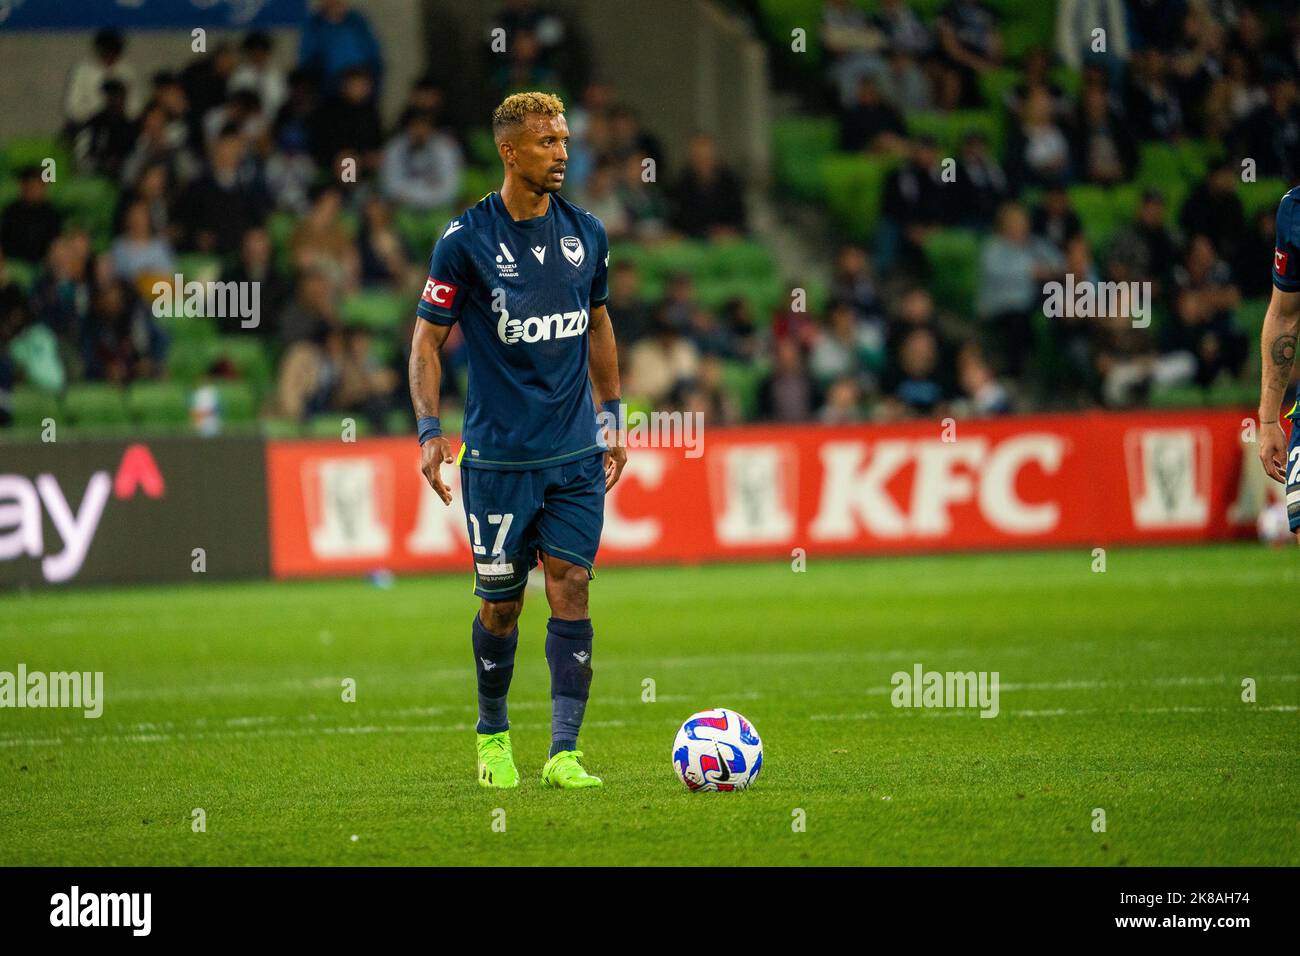 Melbourne, Australia. 22, October, 2022. Melbourne Victory Midfielder Luis Nani #17 prepares to take a free kick during the Round 3 of Isuzu UTE A-League Men’s 2022/23 season between Melbourne Victory and Melbourne City.  Credit: James Forrester/Alamy Live News. Stock Photo